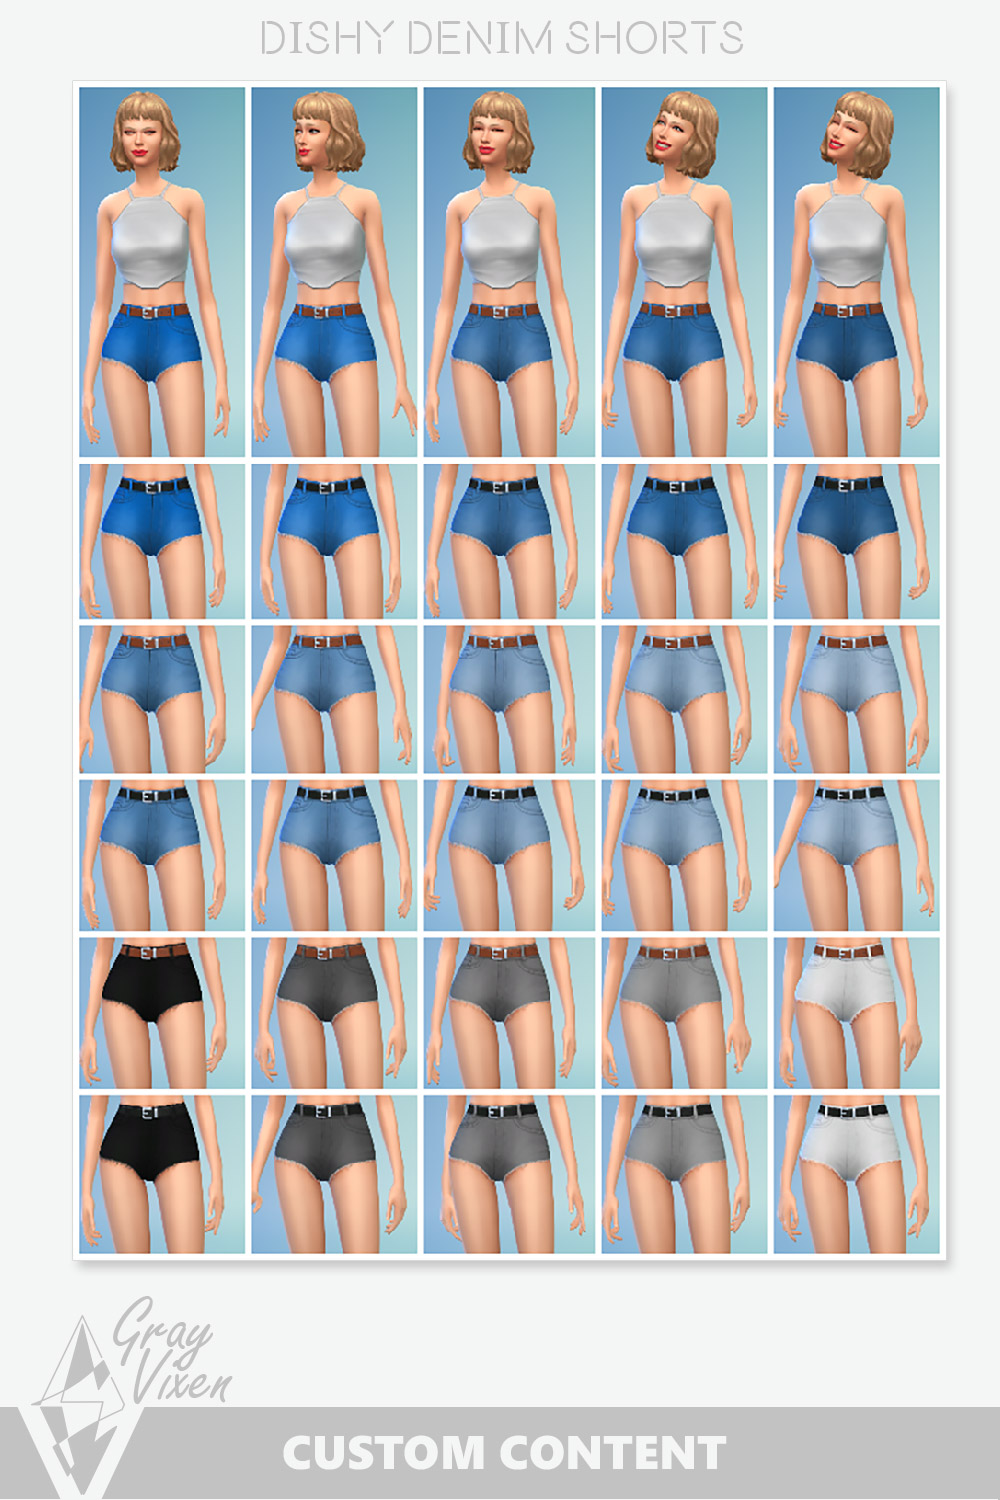 The Sims 4 Shorts